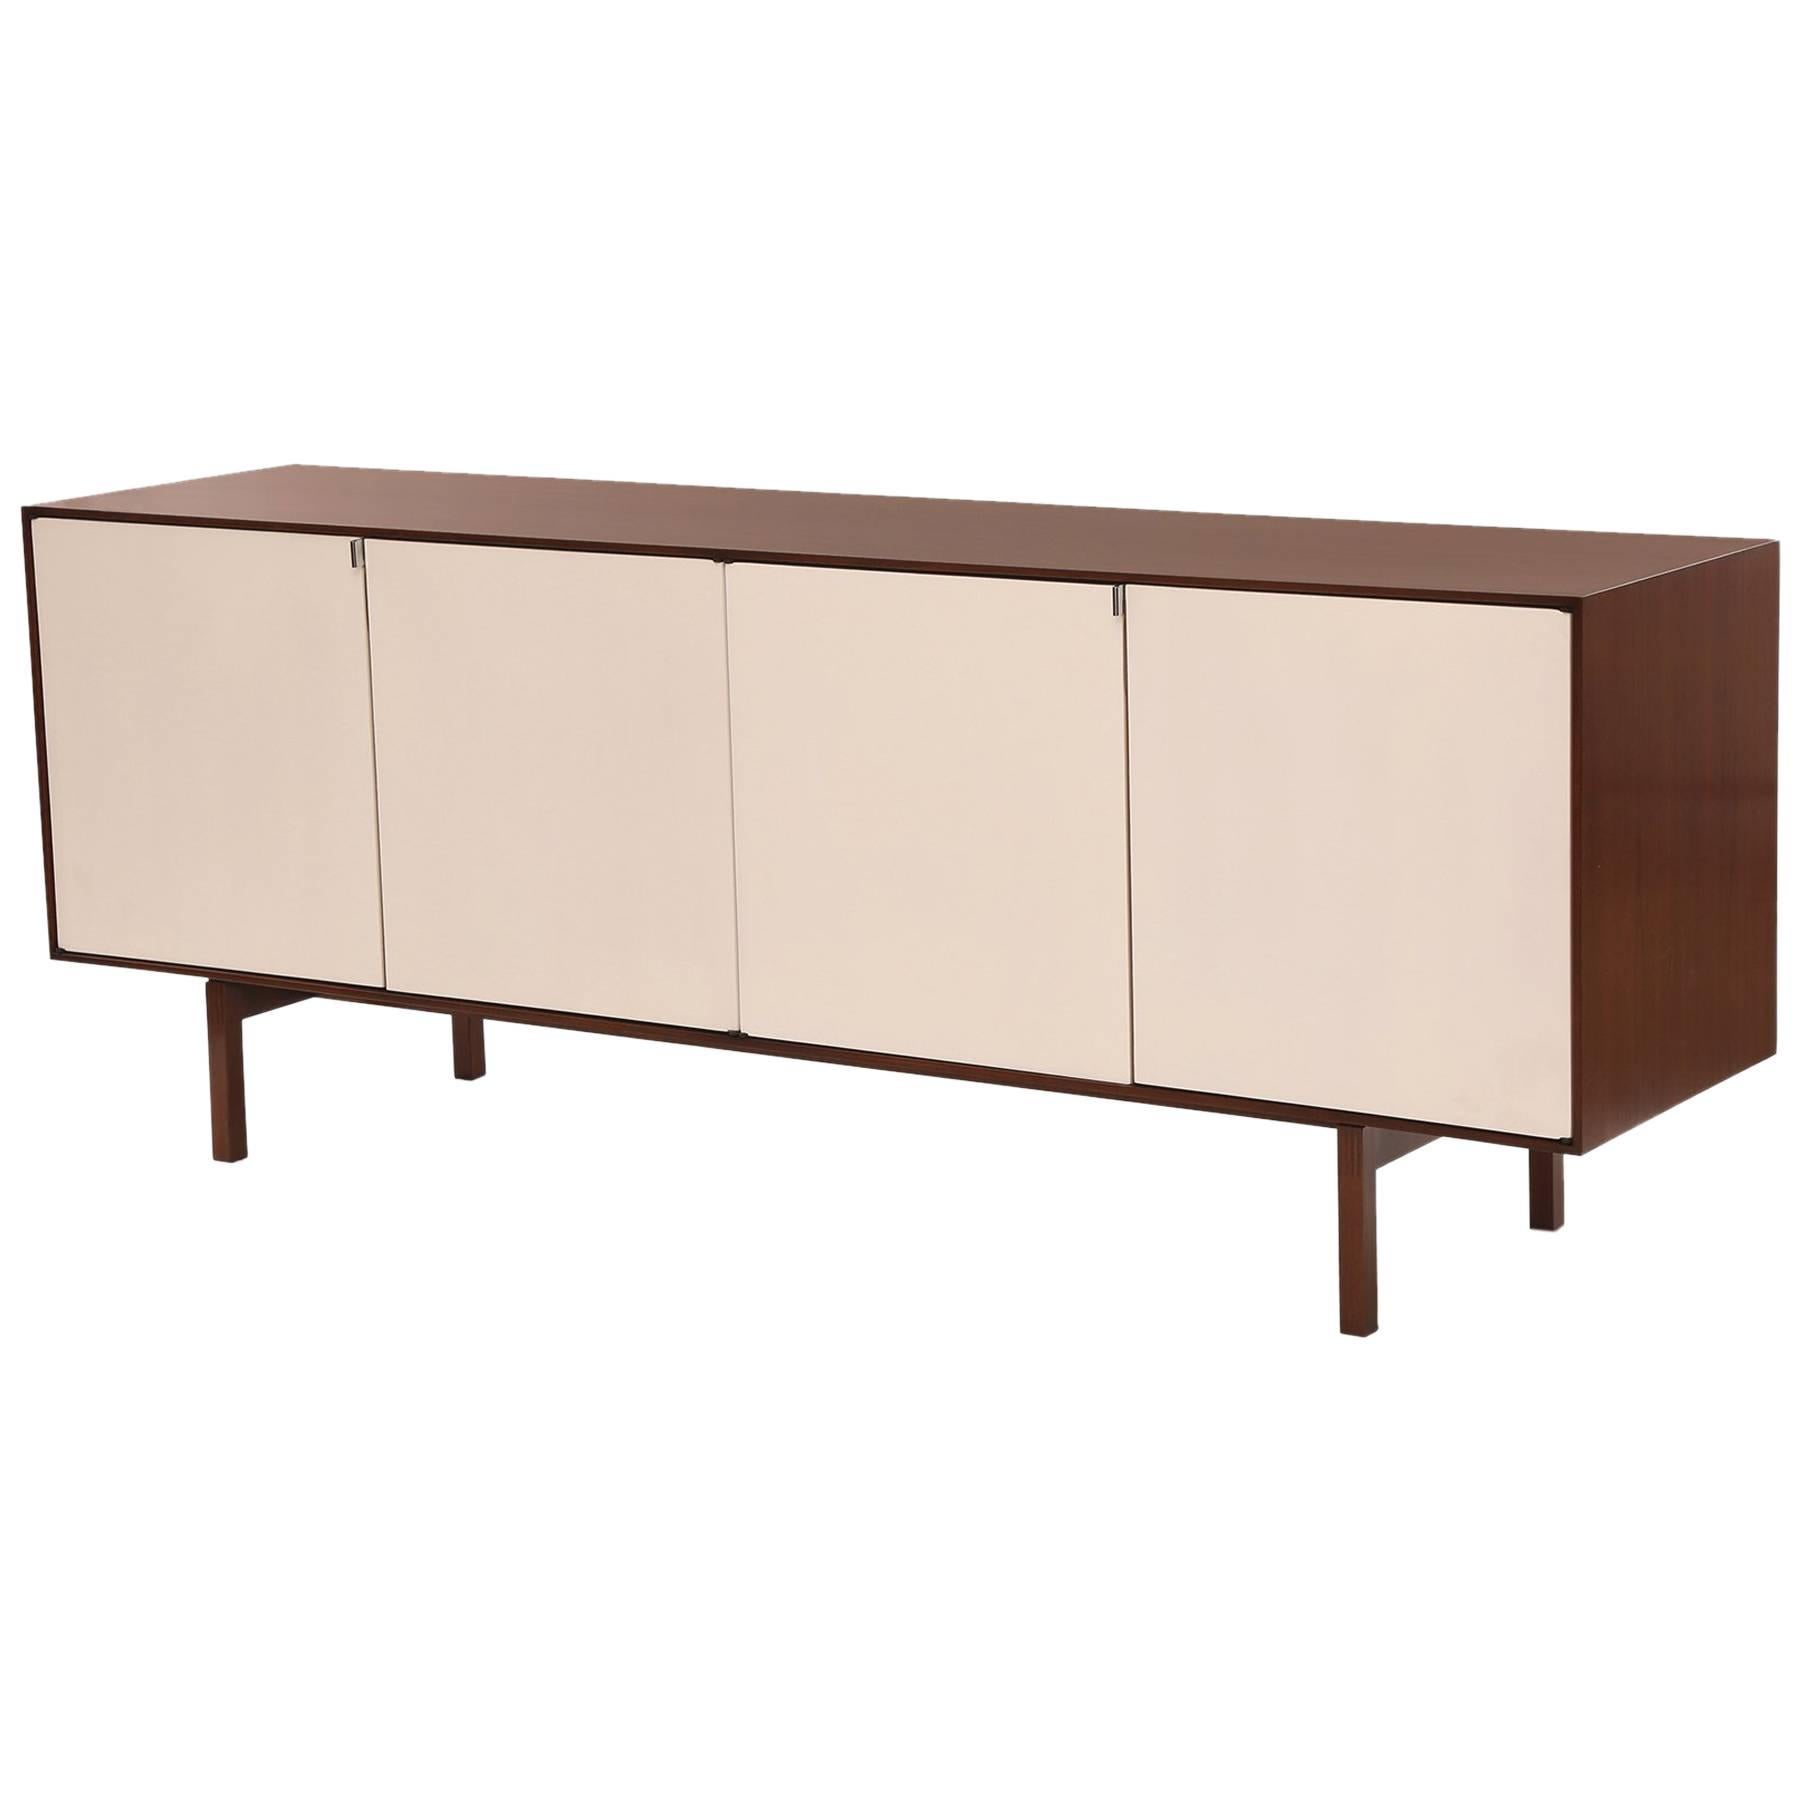 Early Florence Knoll Walnut Steel and Lacquered Credenza